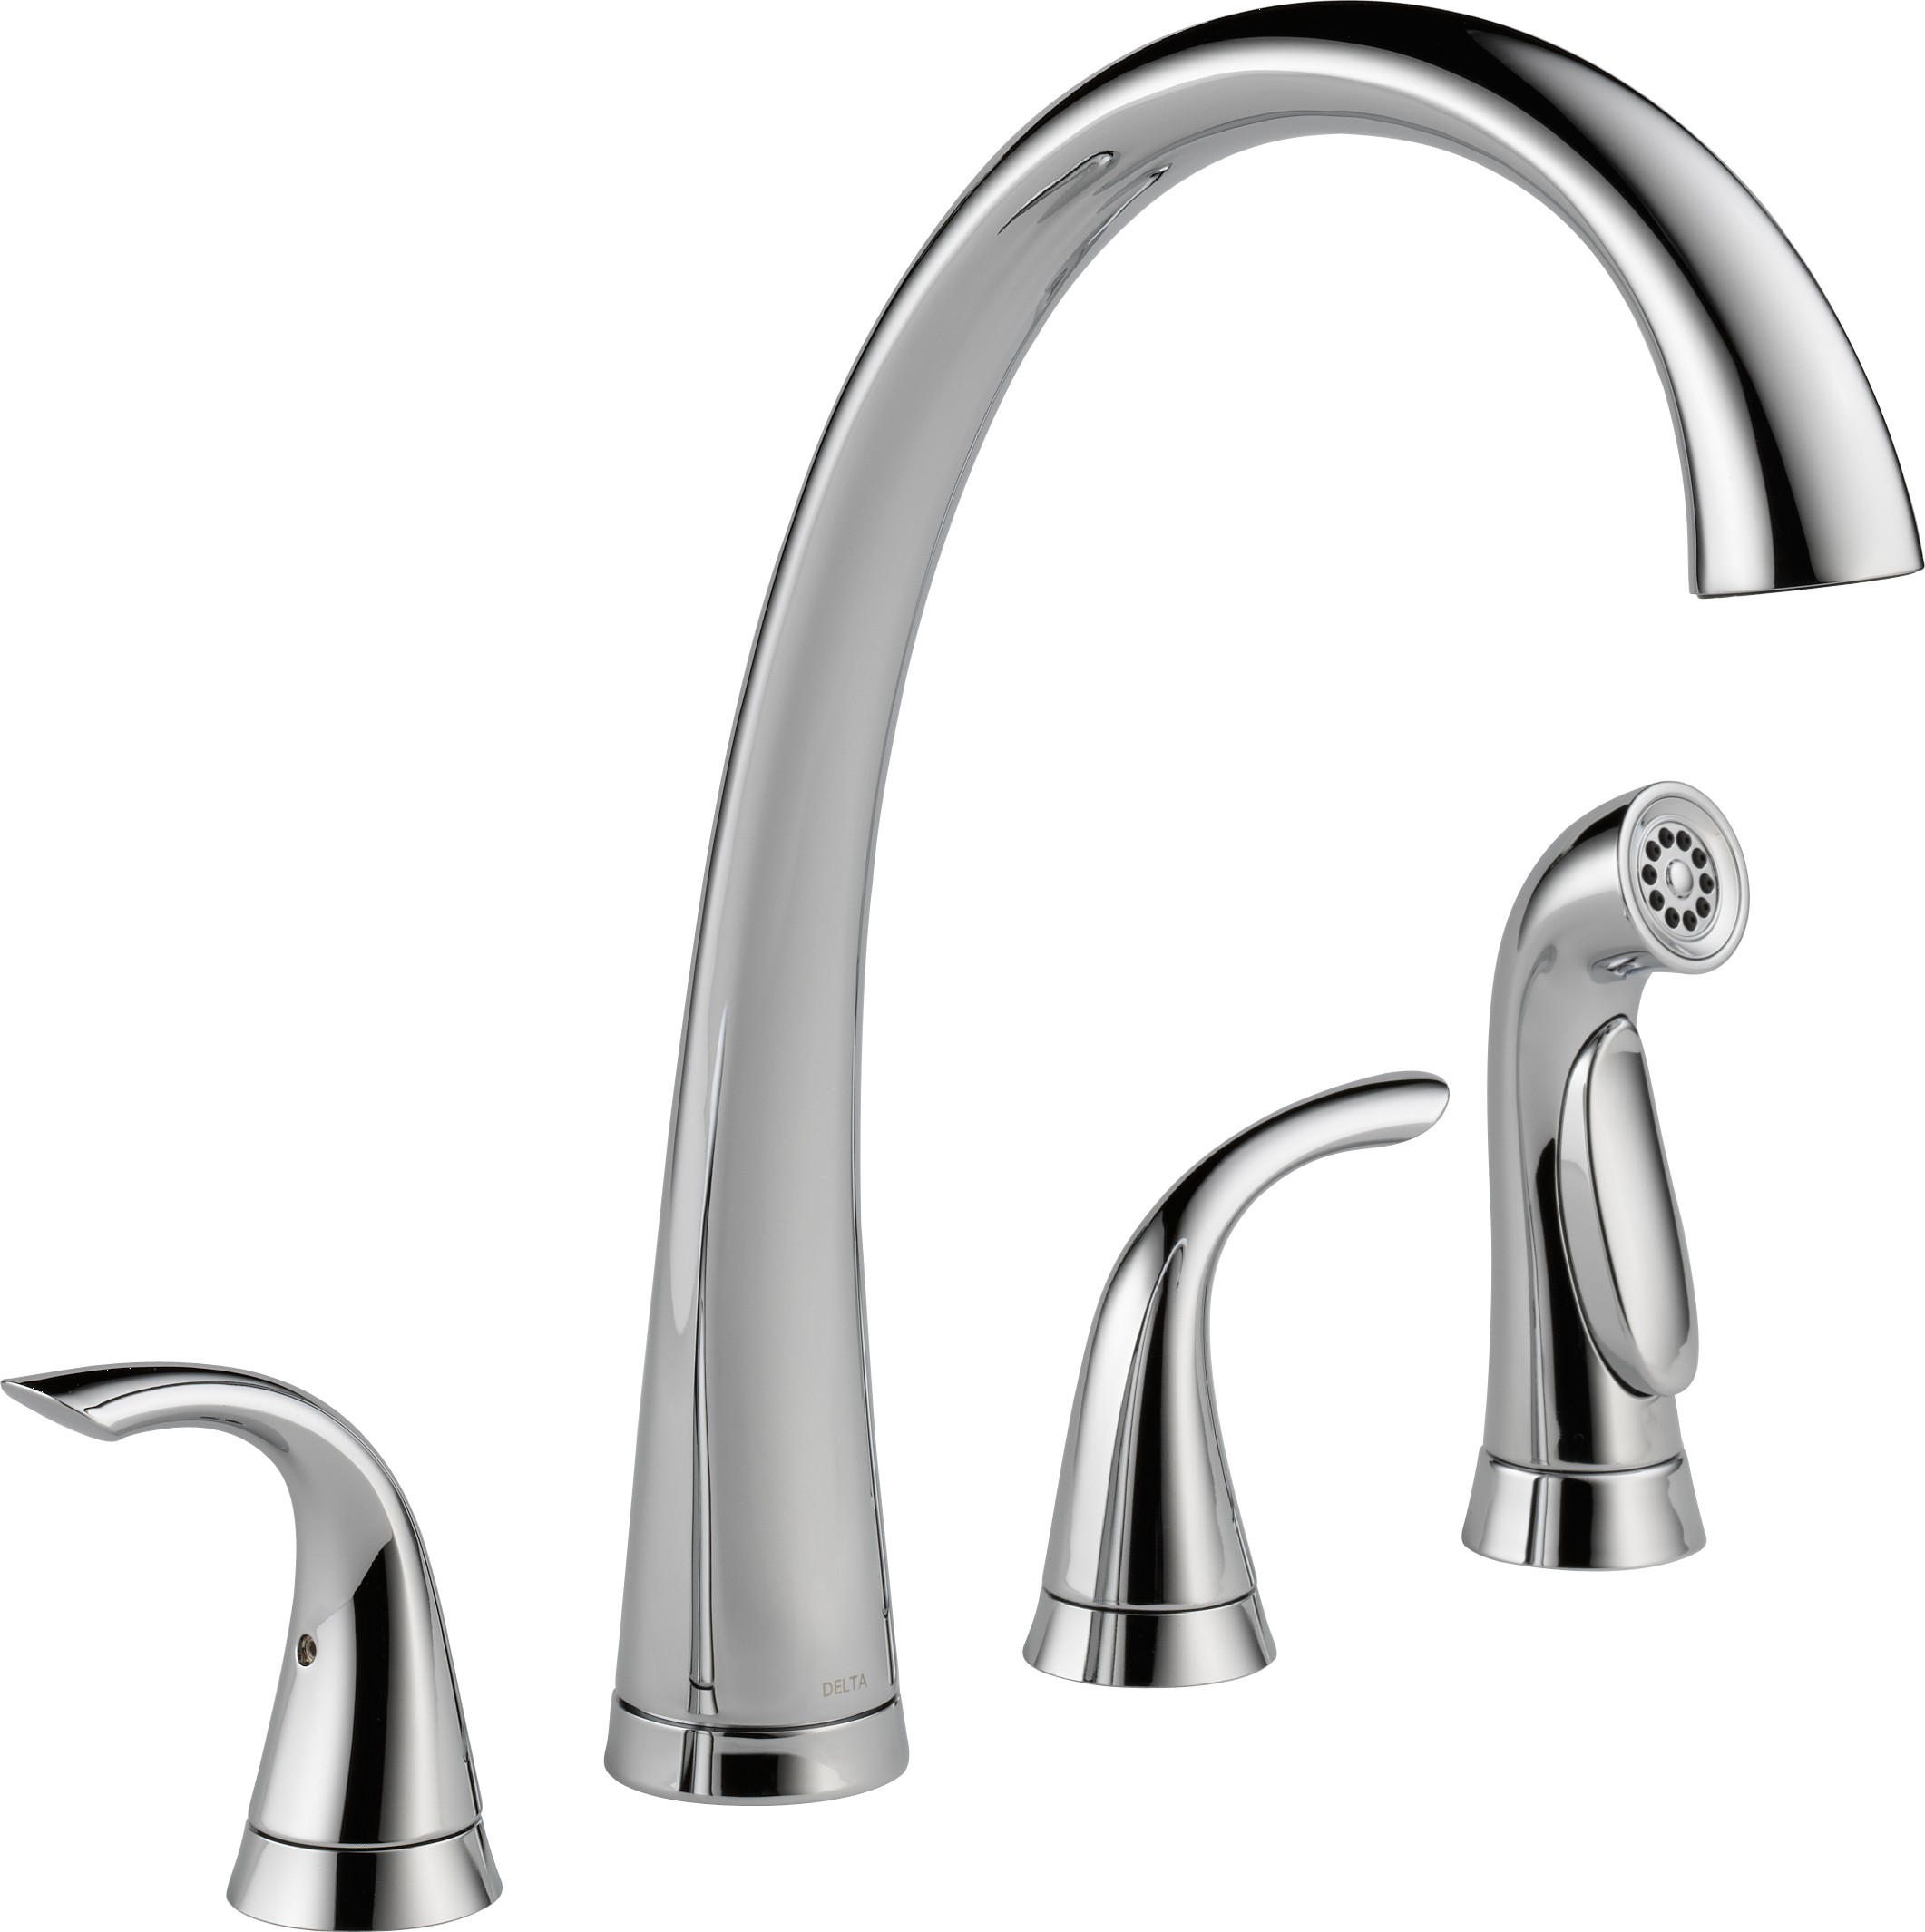 Delta-Delex-Brizo | 2480-DST | DELTA 2480-DST PILAR WATERFALL 2-HANDLE 4-HOLE WIDESPREAD KITCHEN FAUCET CP CHROME WITH SIDE SPRAY  